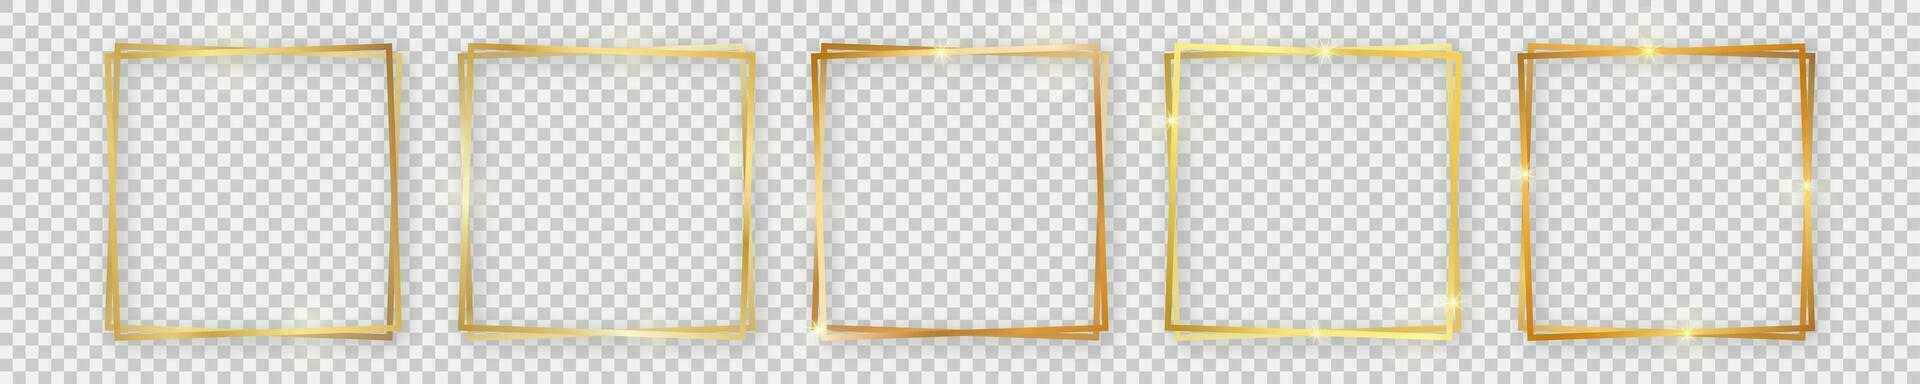 Set of five double gold shiny square frames with glowing effects and shadows on background. Vector illustration